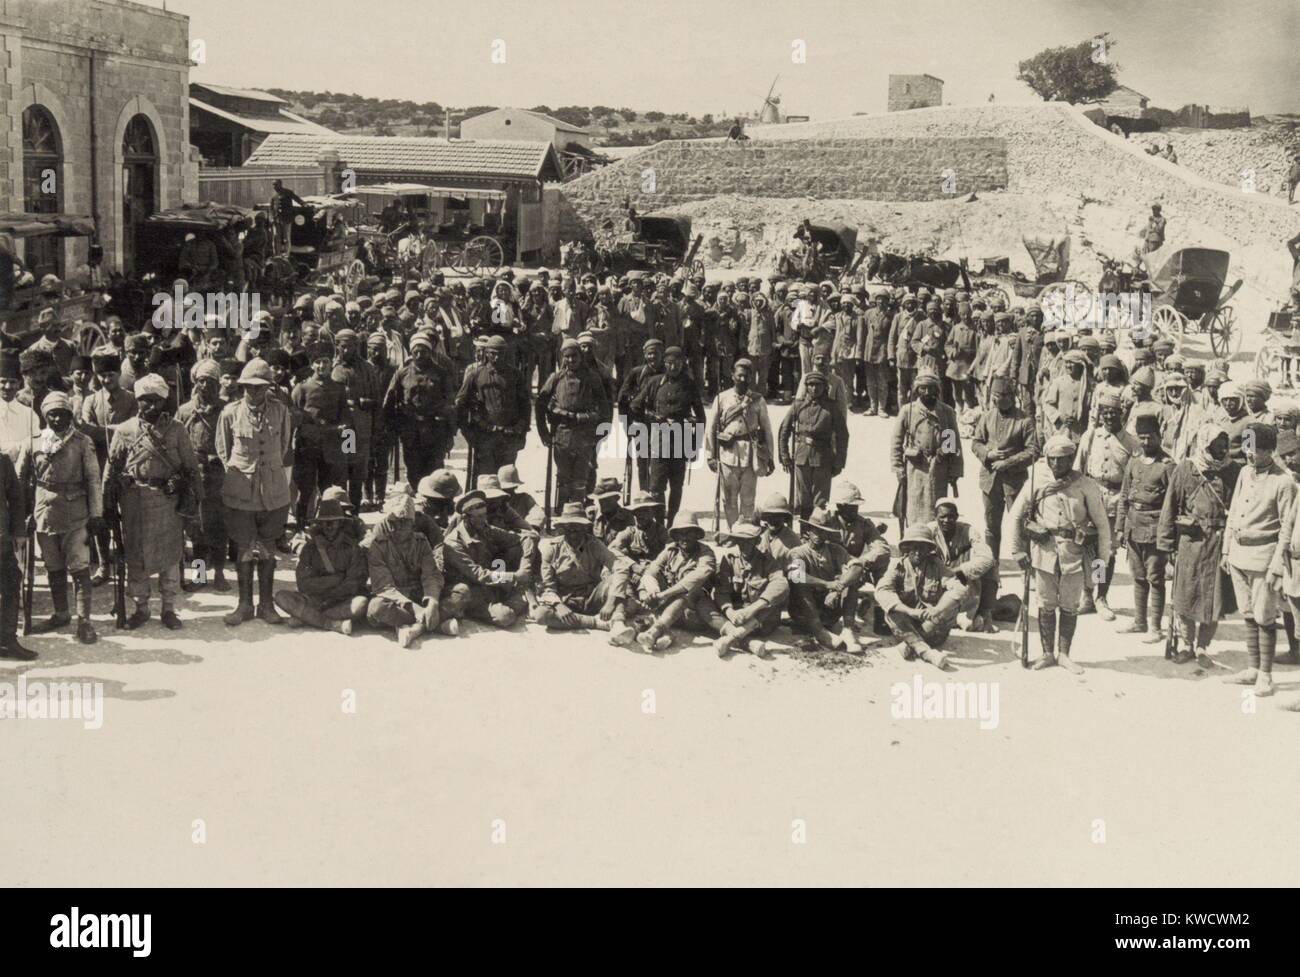 Seated Australian POWs captured at Shellal in the First Battle of Gaza, March 26, 1917. Soldiers of the Egyptian Expeditionary Force are surrounded by their victorious Ottoman Turkish captors. (BSLOC 2017 1 160) Stock Photo